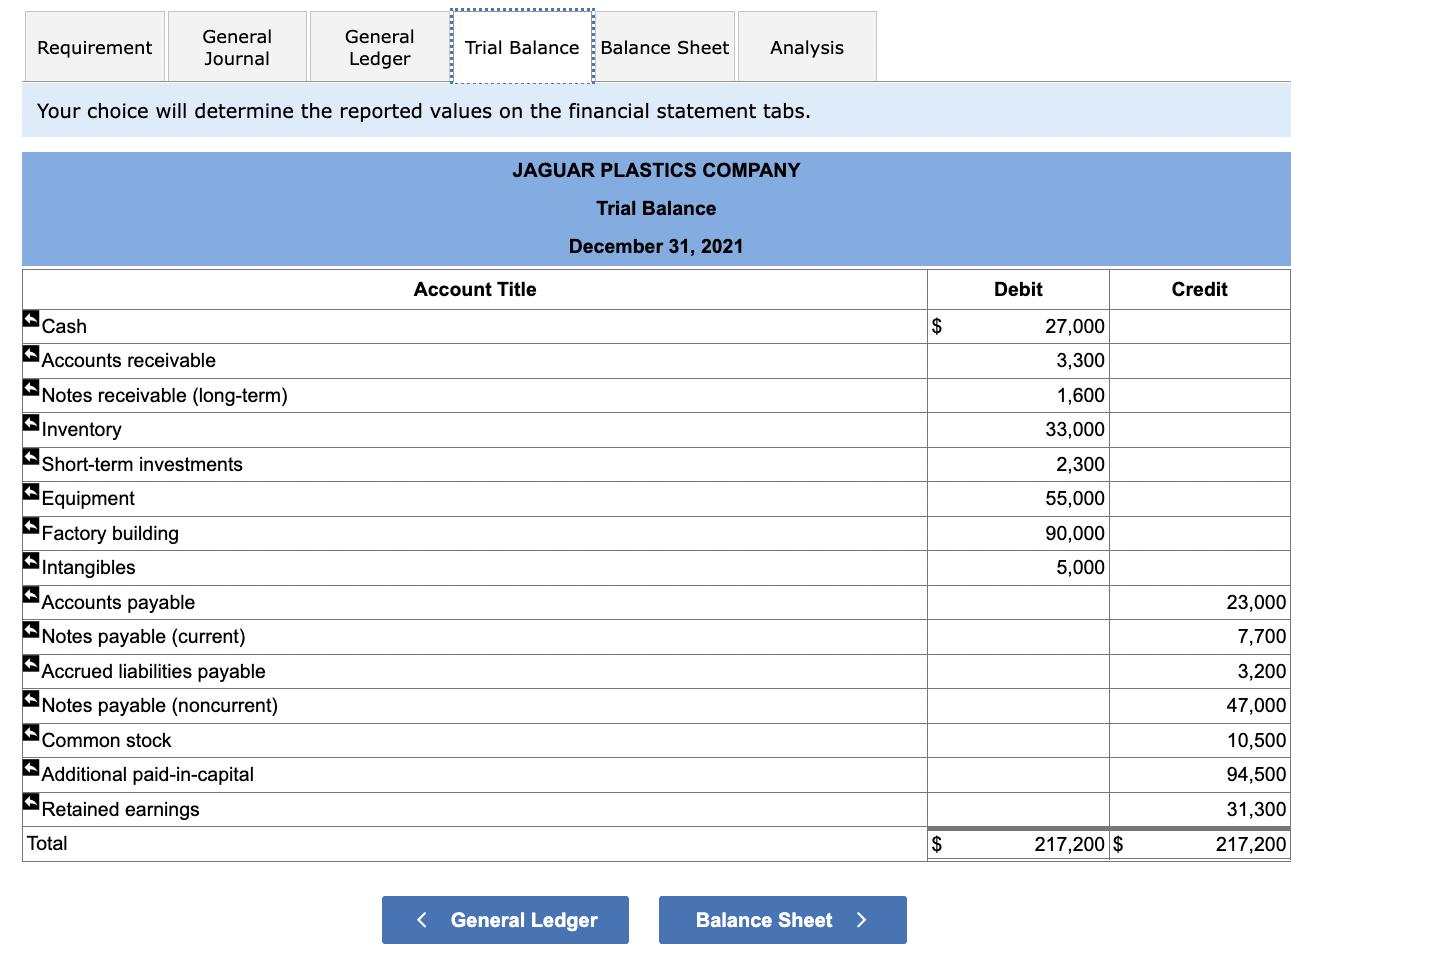 Your choice will determine the reported values on the financial statement tabs.